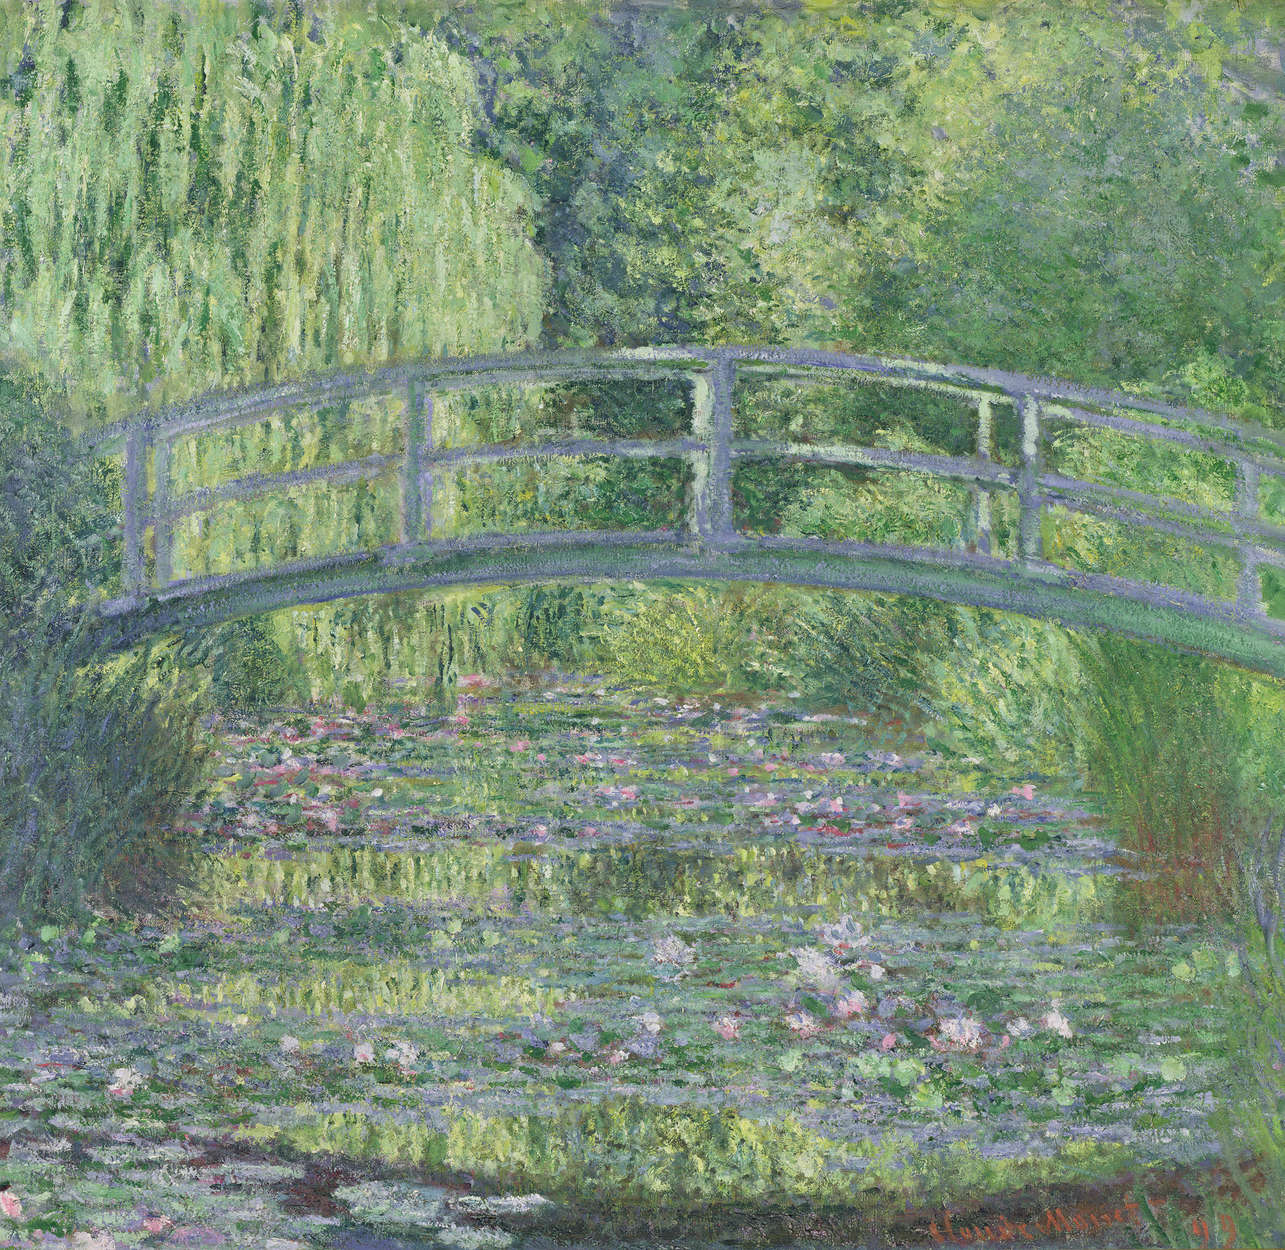             Water Lily Pond: Green Harmony mural by Claude Monet
        